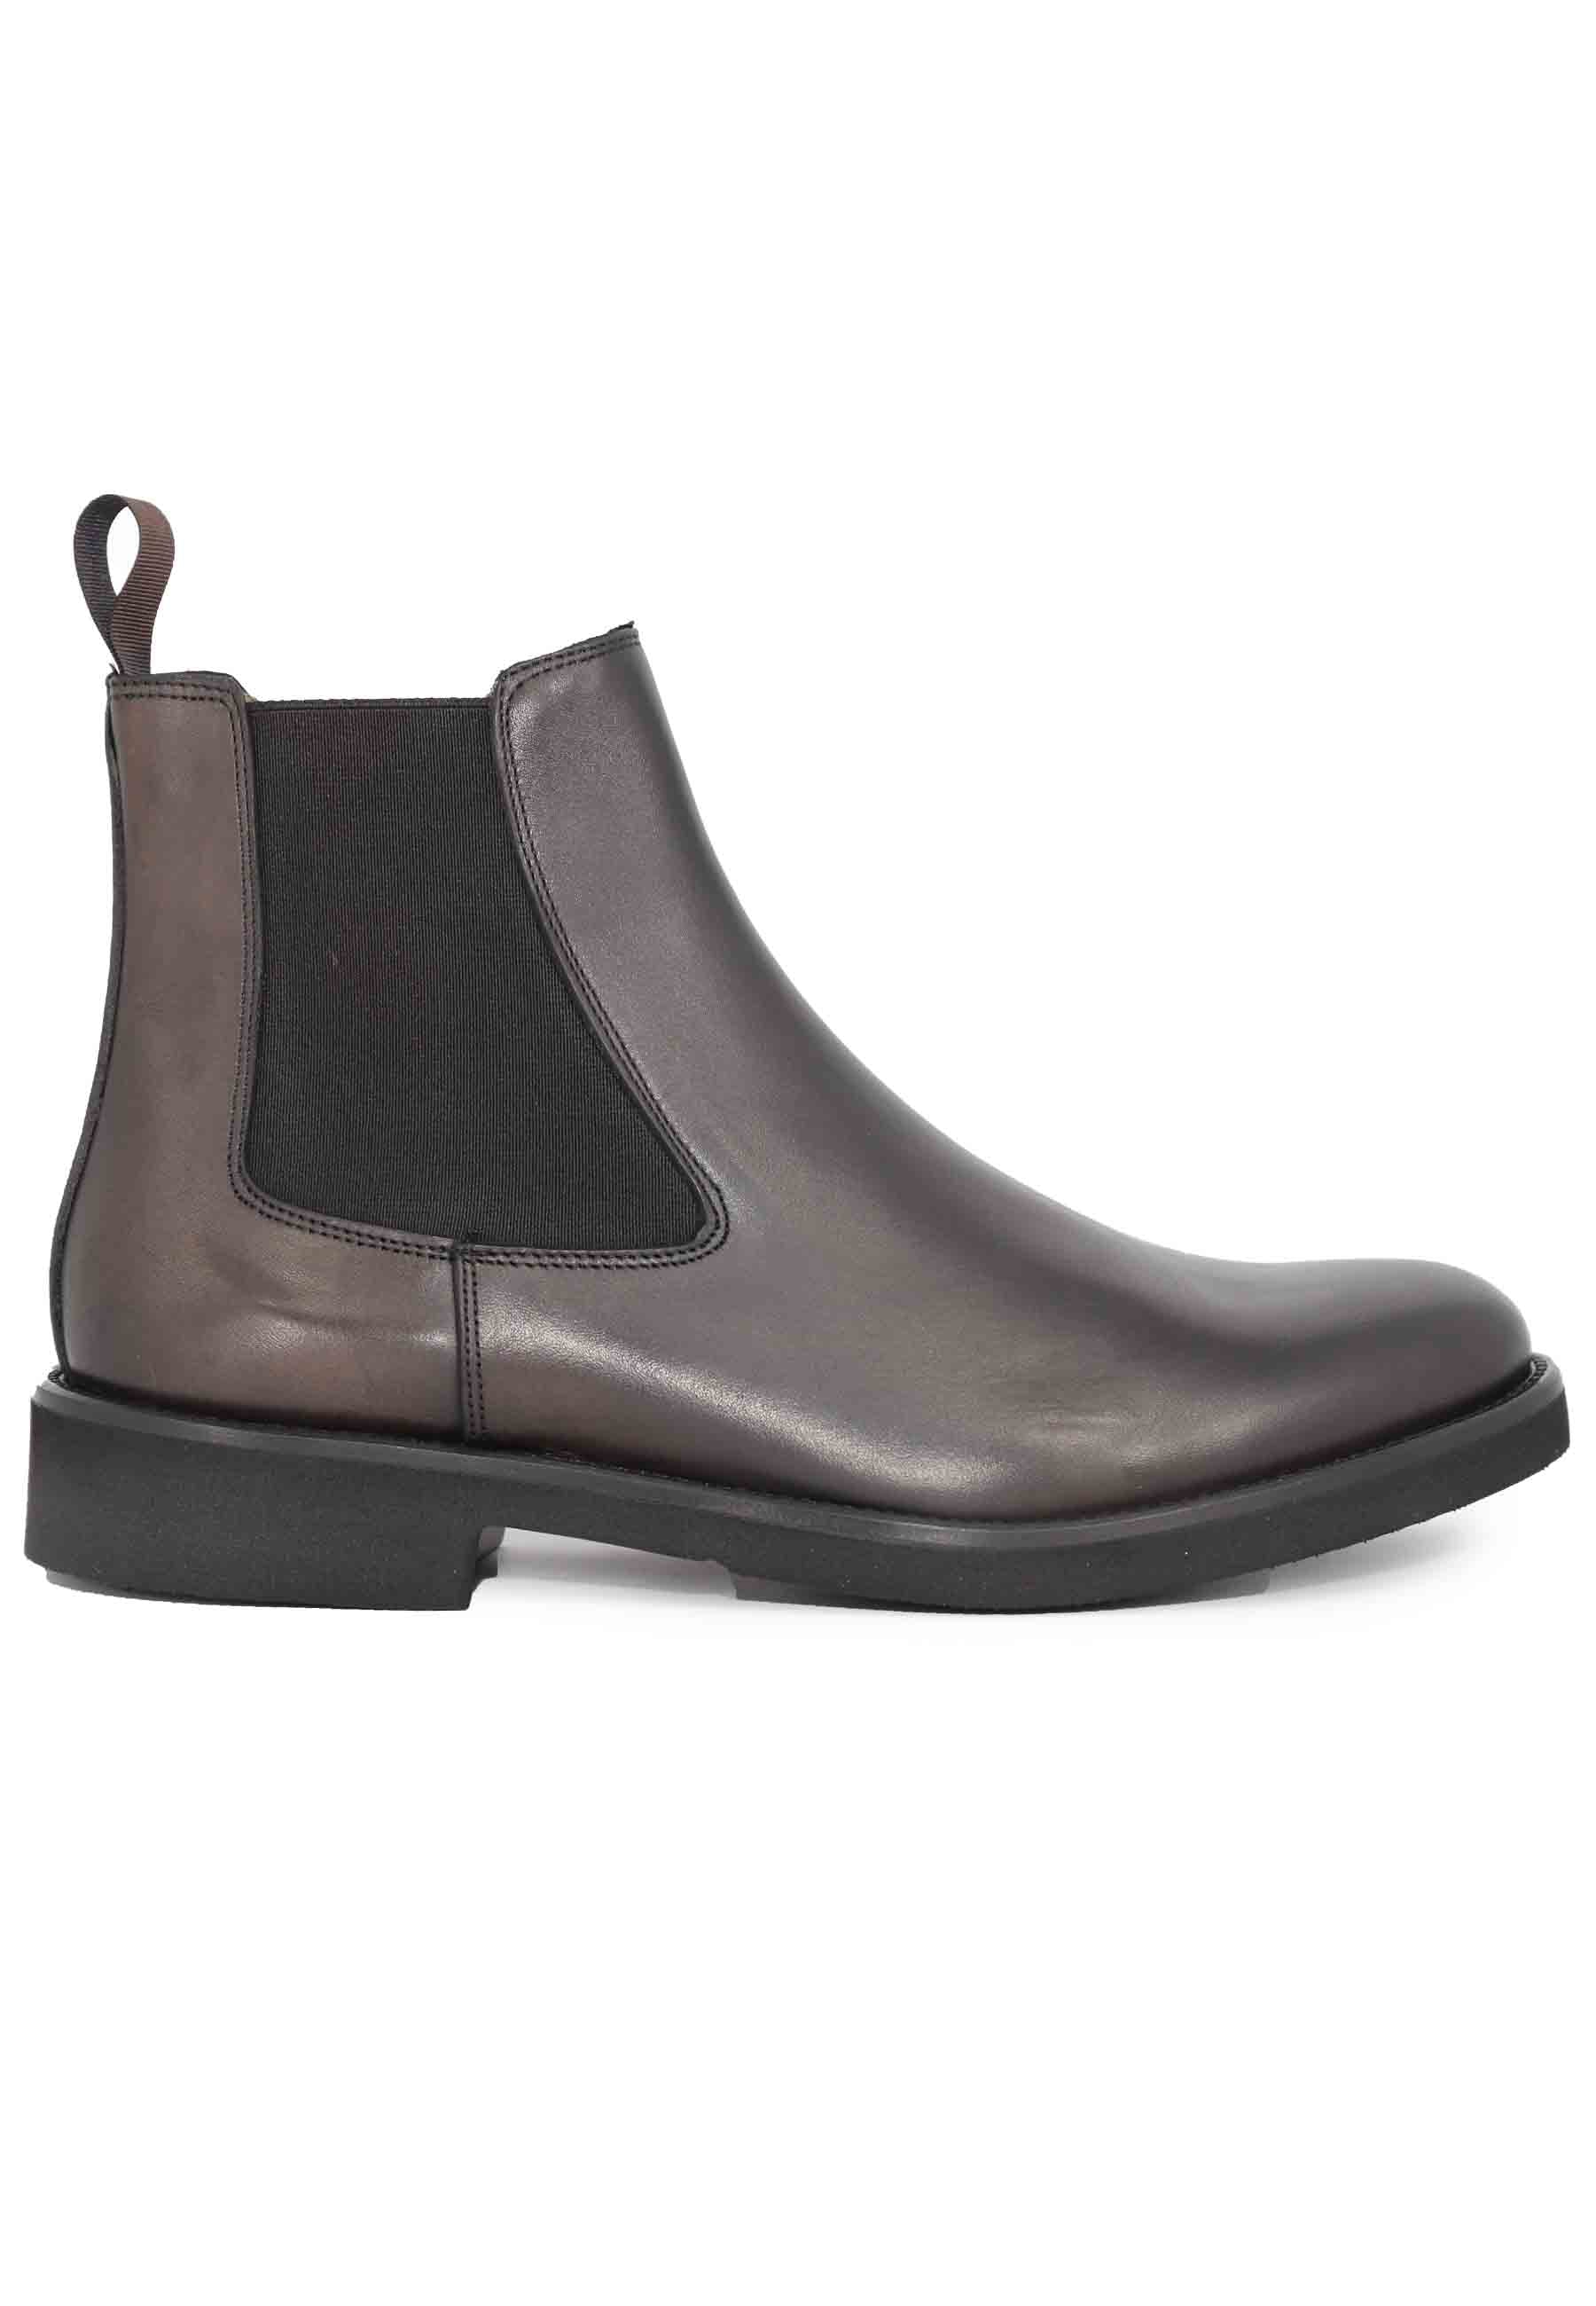 Men's chelsea boot in brown leather with ultra-light sole